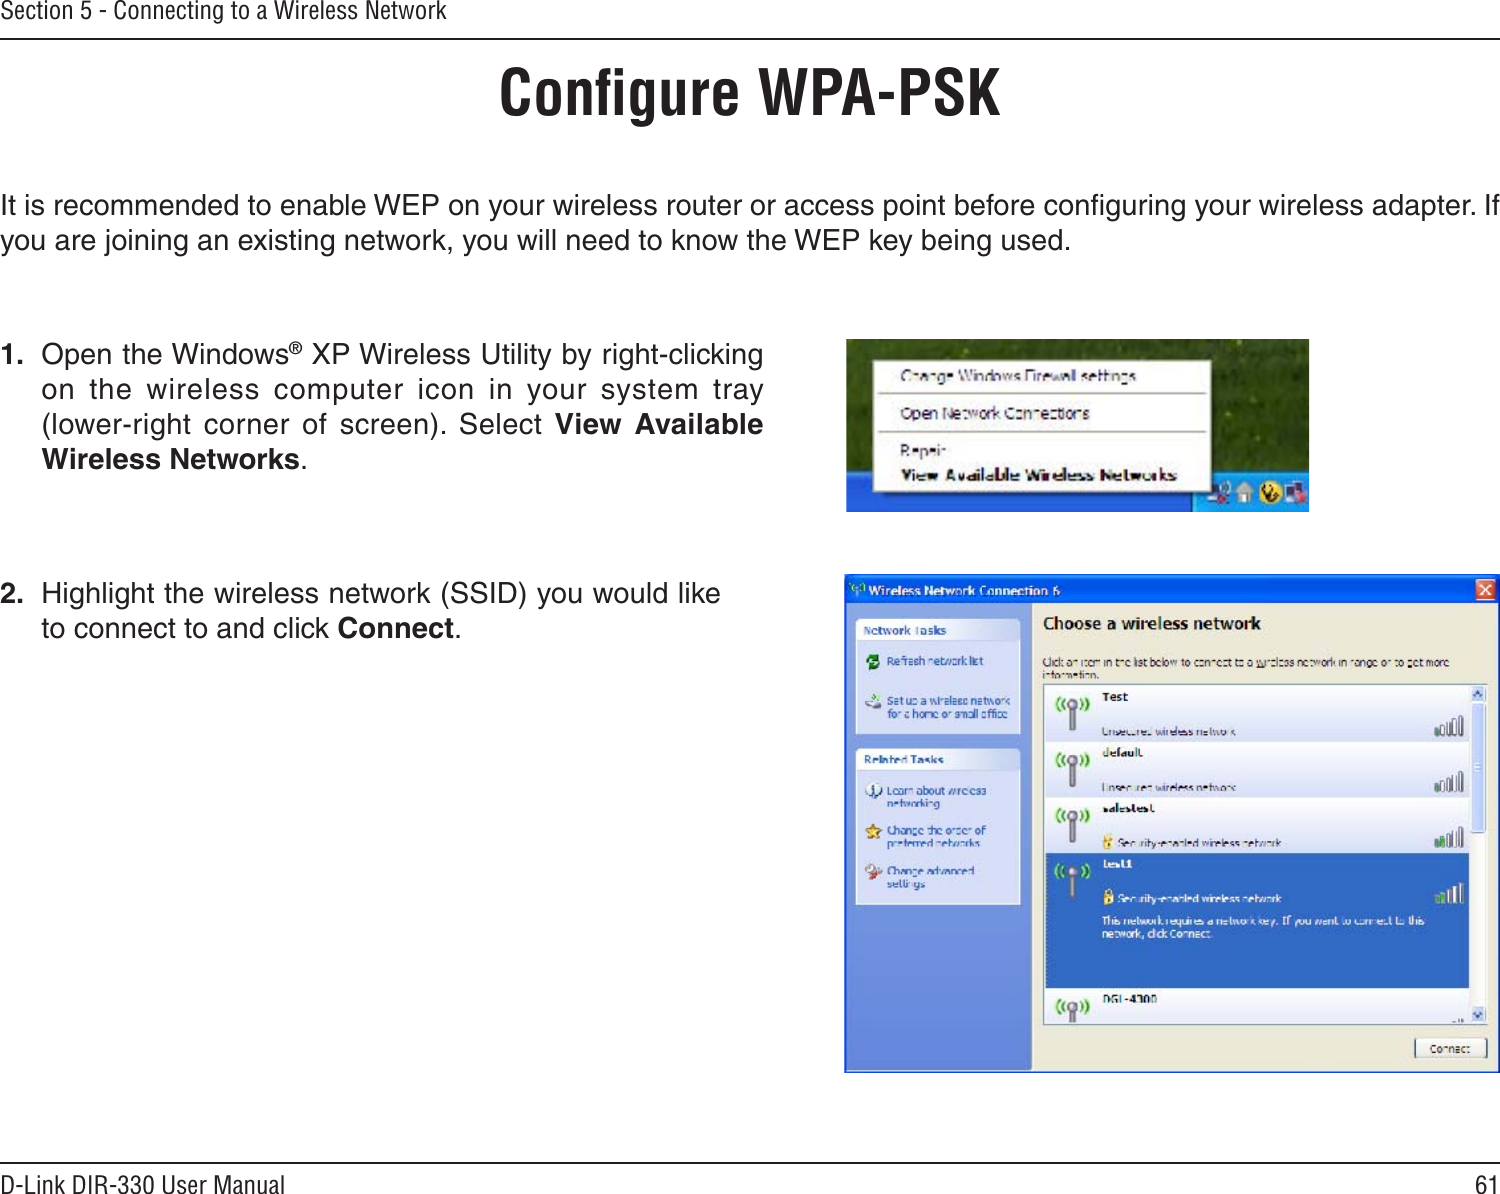 61D-Link DIR-330 User ManualSection 5 - Connecting to a Wireless NetworkConﬁgure WPA-PSKIt is recommended to enable WEP on your wireless router or access point before conﬁguring your wireless adapter. If you are joining an existing network, you will need to know the WEP key being used.2.  Highlight the wireless network (SSID) you would like to connect to and click Connect.1.  Open the Windows® XP Wireless Utility by right-clicking on  the  wireless  computer  icon  in  your  system  tray  (lower-right  corner  of  screen).  Select  View  Available Wireless Networks. 